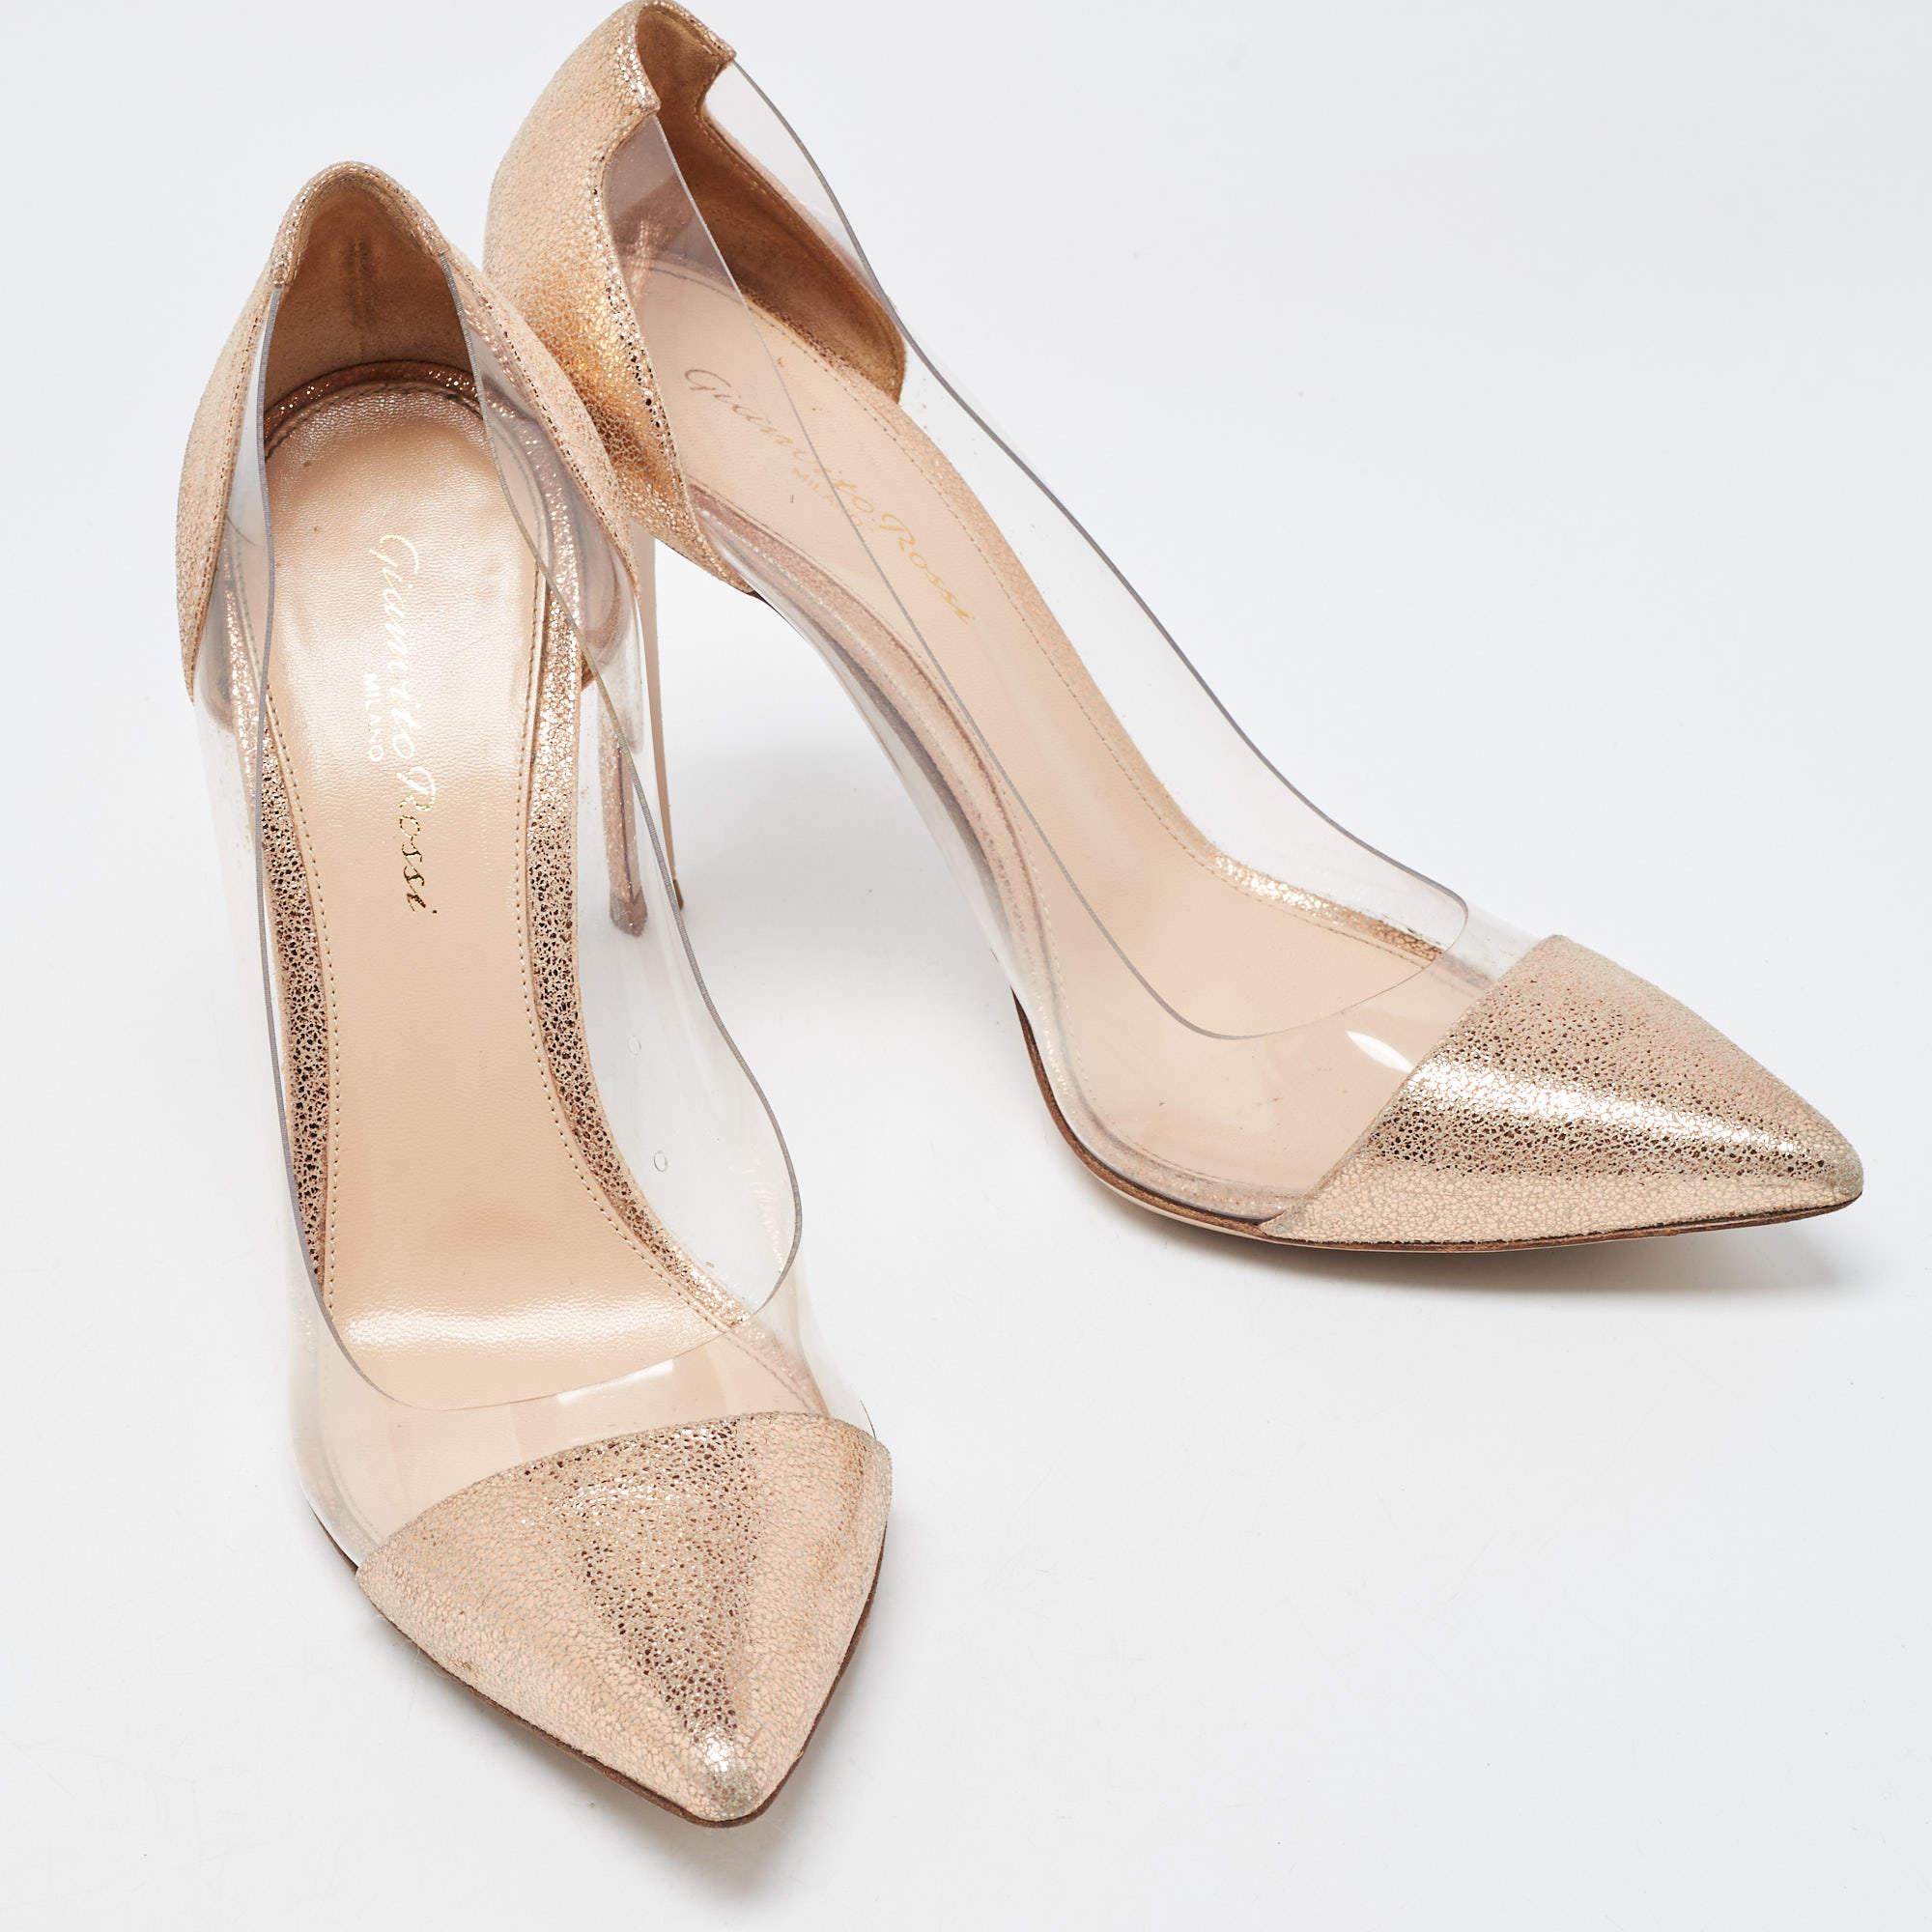 Perfectly sewn and finished to ensure an elegant look and fit, these Gianvito Rossi pumps are a purchase you'll love flaunting. They look great on the feet.

